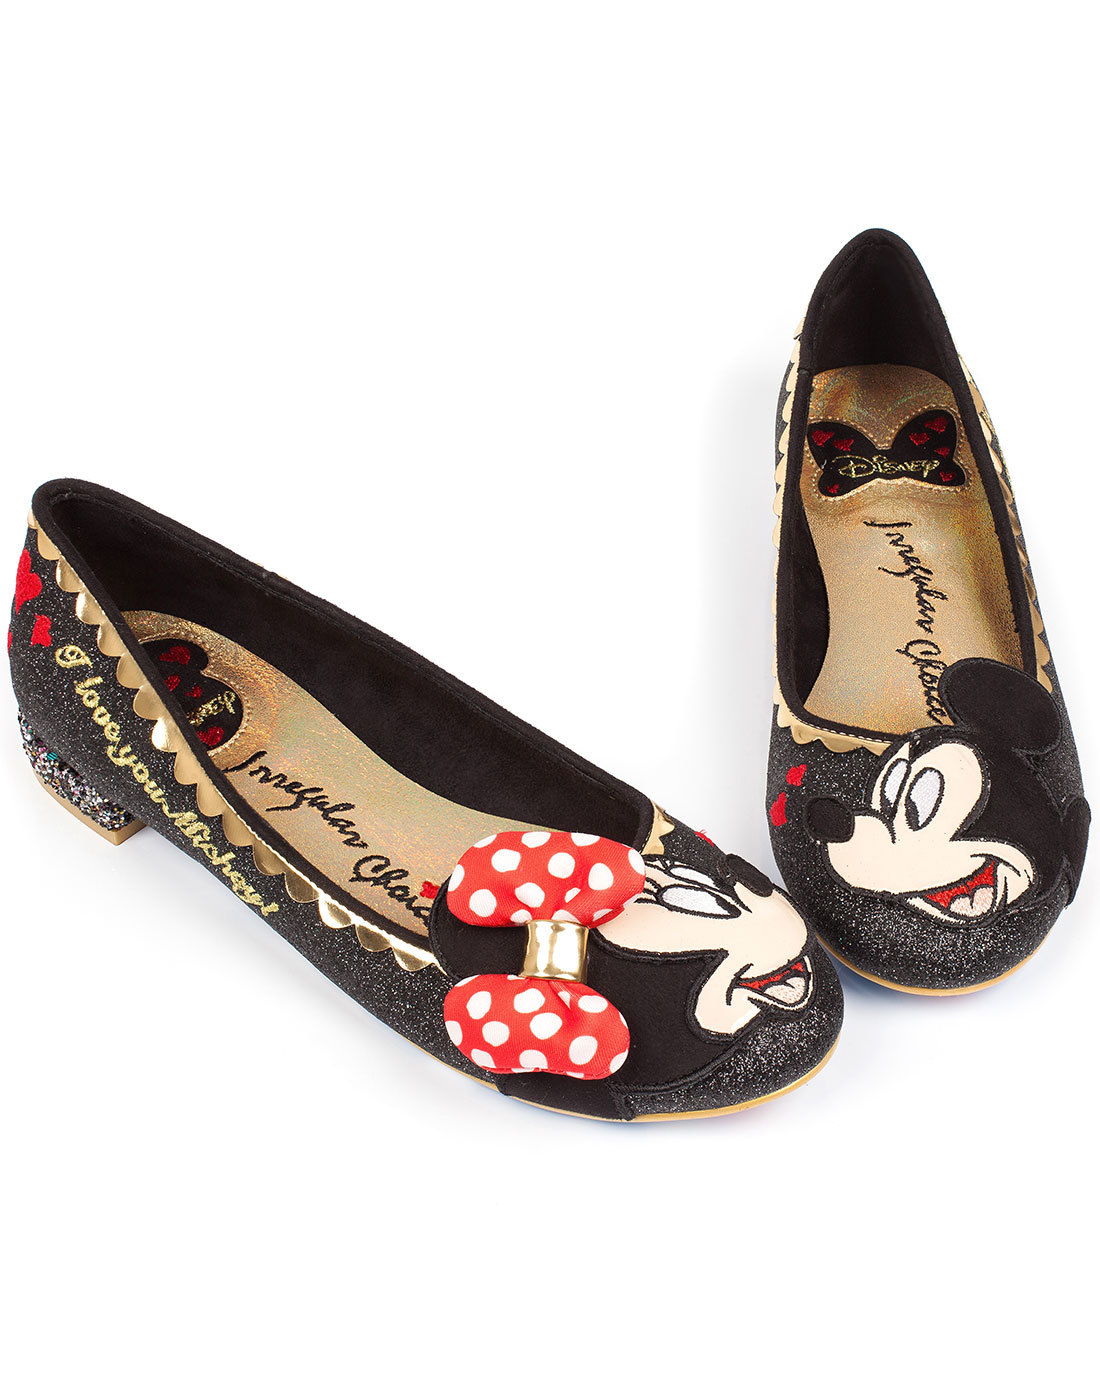 Why Hello Mickey \u0026 MInnie Mouse Flat Shoes